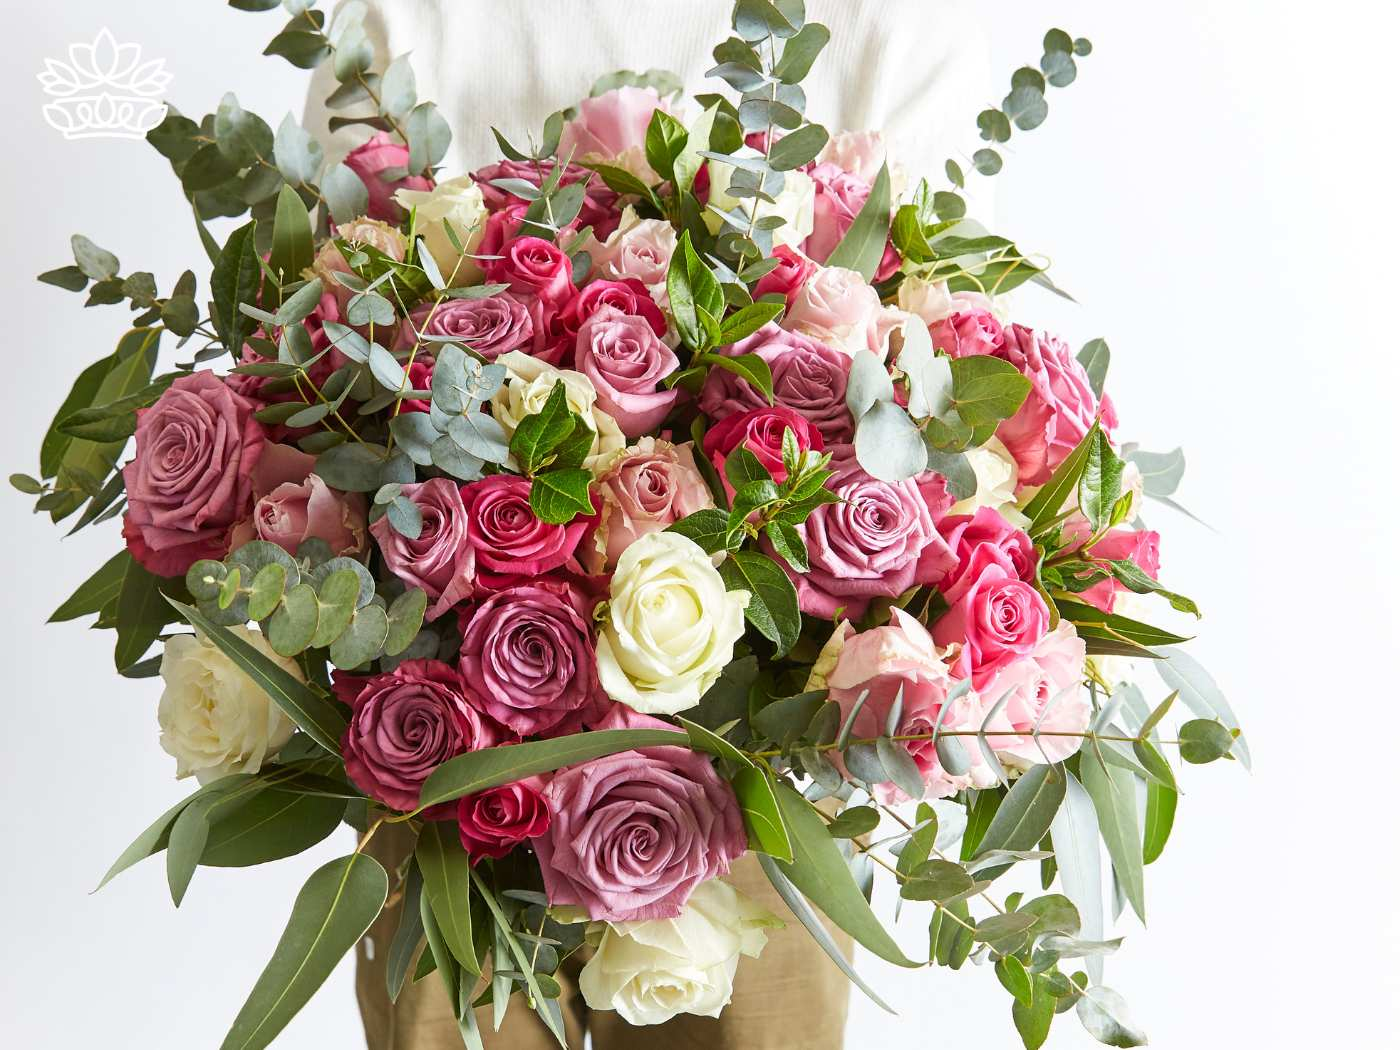 A lush bouquet filled with shades of pink and white roses and accented by eucalyptus and vibrant green leaves, representing elegance and heartfelt gifting. Fabulous Flowers and Gifts. Gifts for Her.